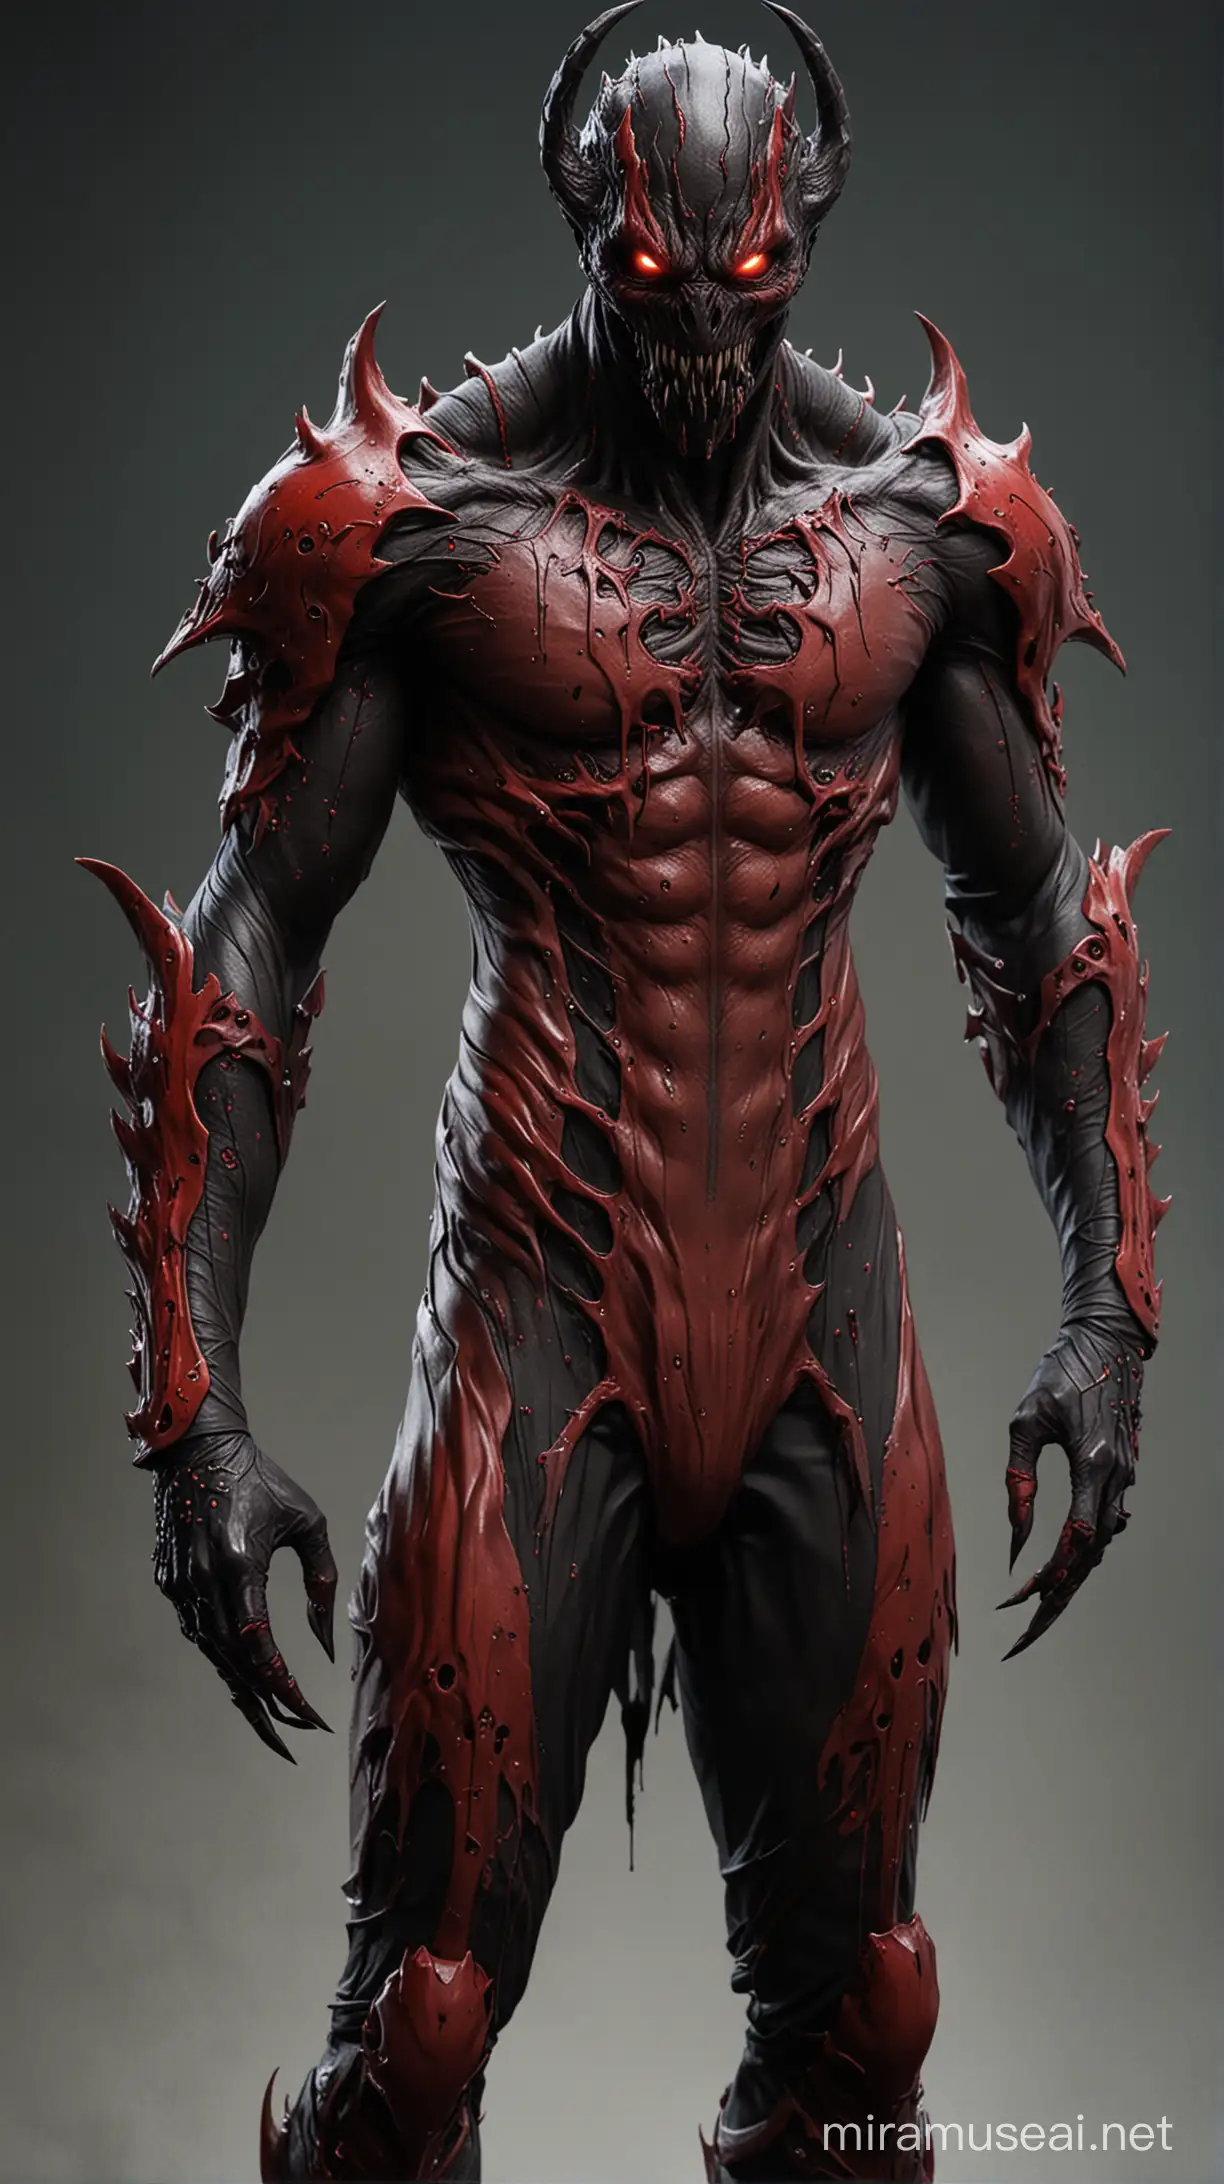 Menacing Gaming Character Demon Suit with Bloodied Claws and Horror Eyes